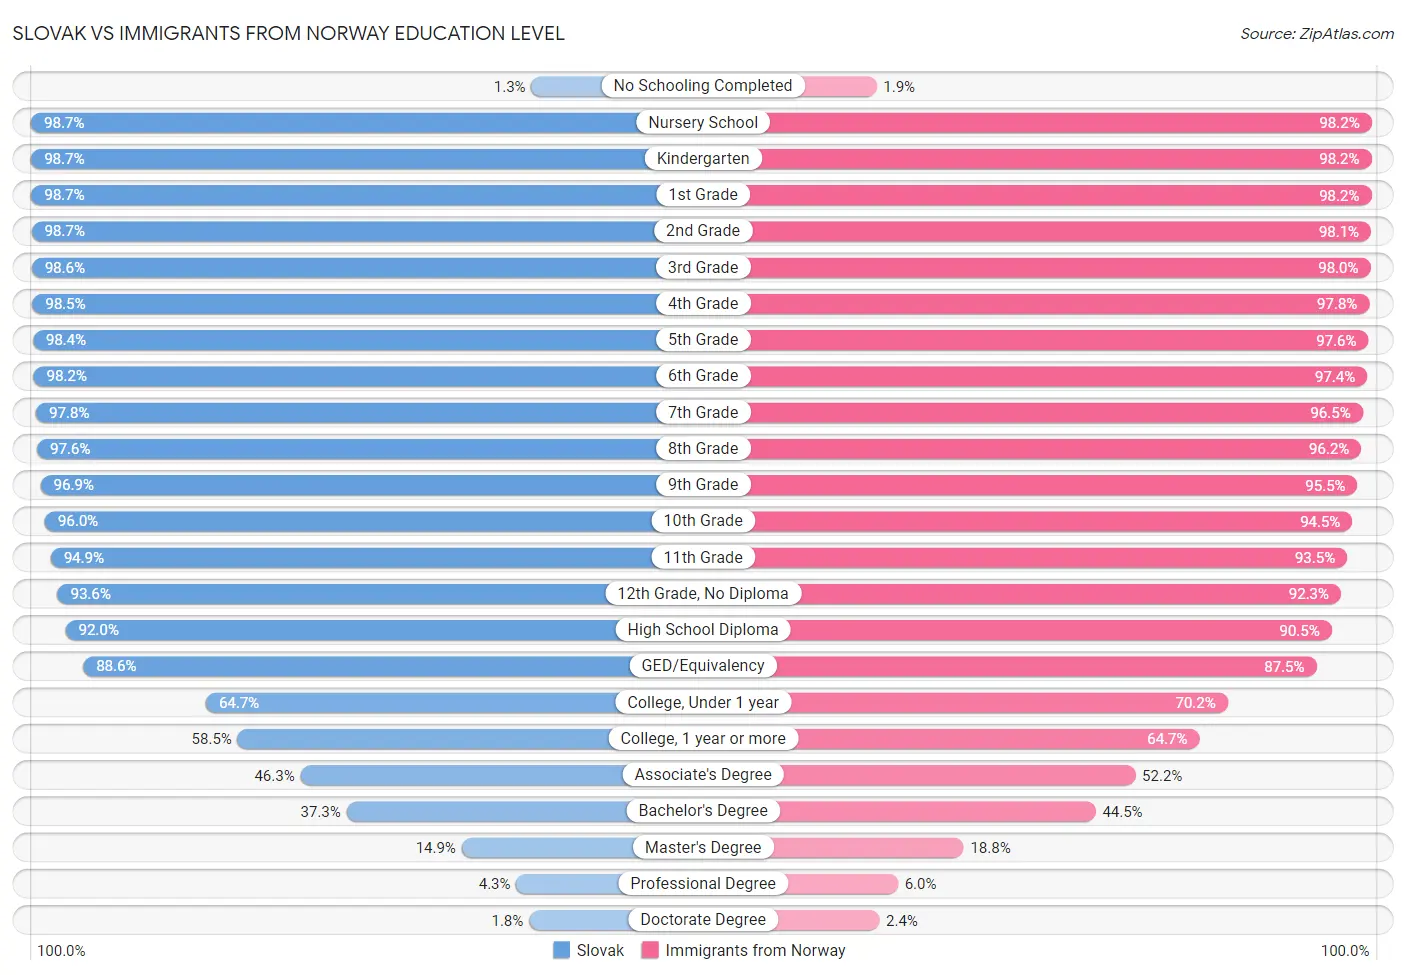 Slovak vs Immigrants from Norway Education Level